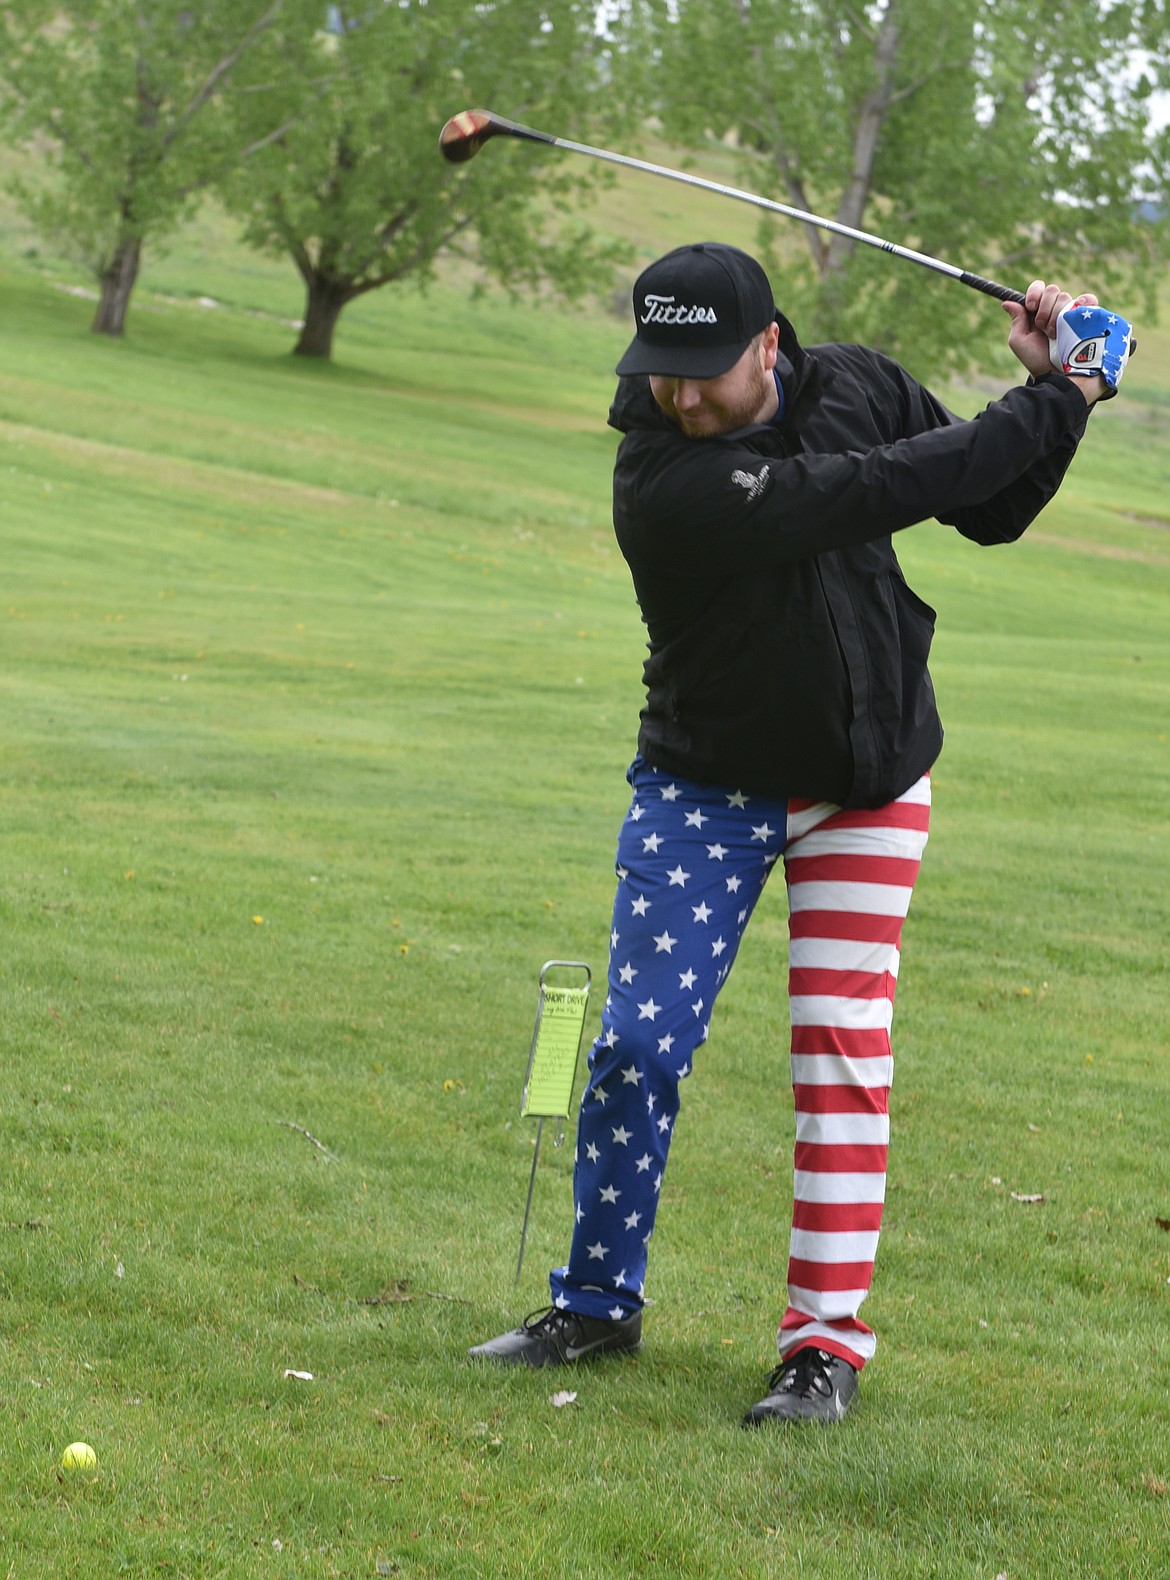 SAM WILKINS wore the most colorful attire during the Hack and Blast tournament Saturday in Plains. He swings a club above, but got the award for the &#147;Longest Drive with a Bat.&#148; (Carolyn Hidy photos/Clark Fork Valley Press)